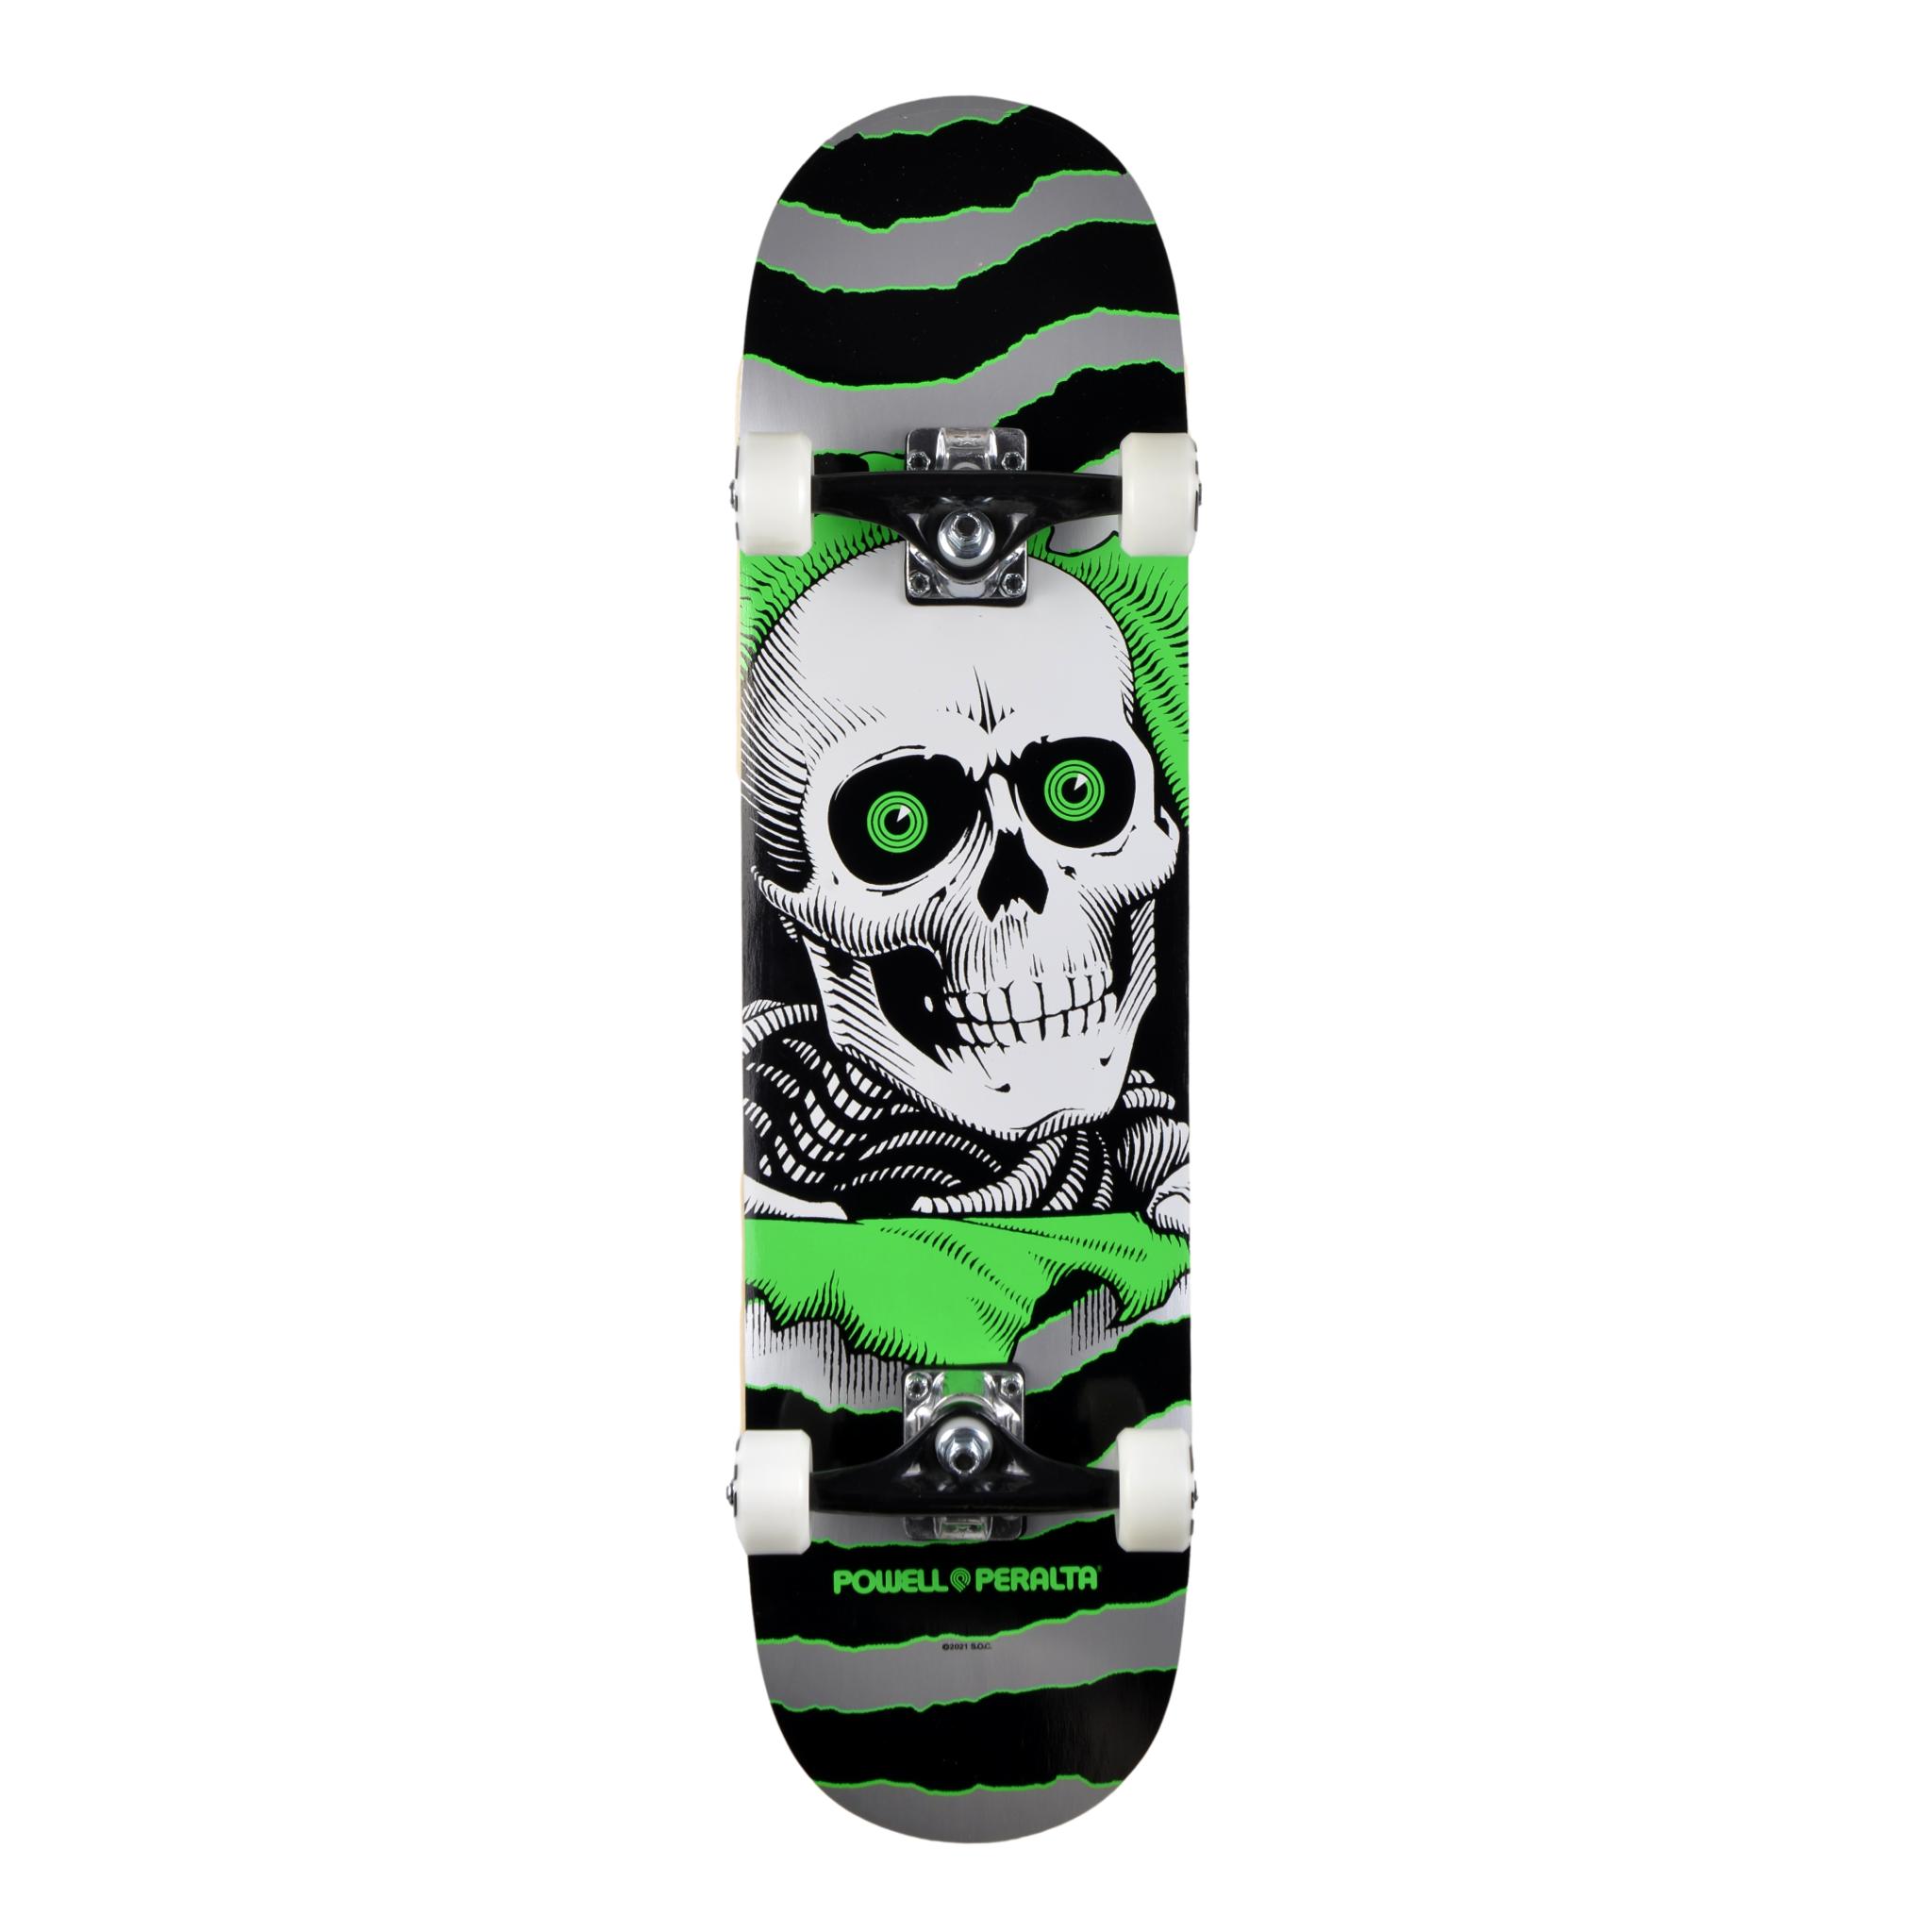 POWELL PERALTA RIPPER SKATE COMPLETO ONE OFF 8.0